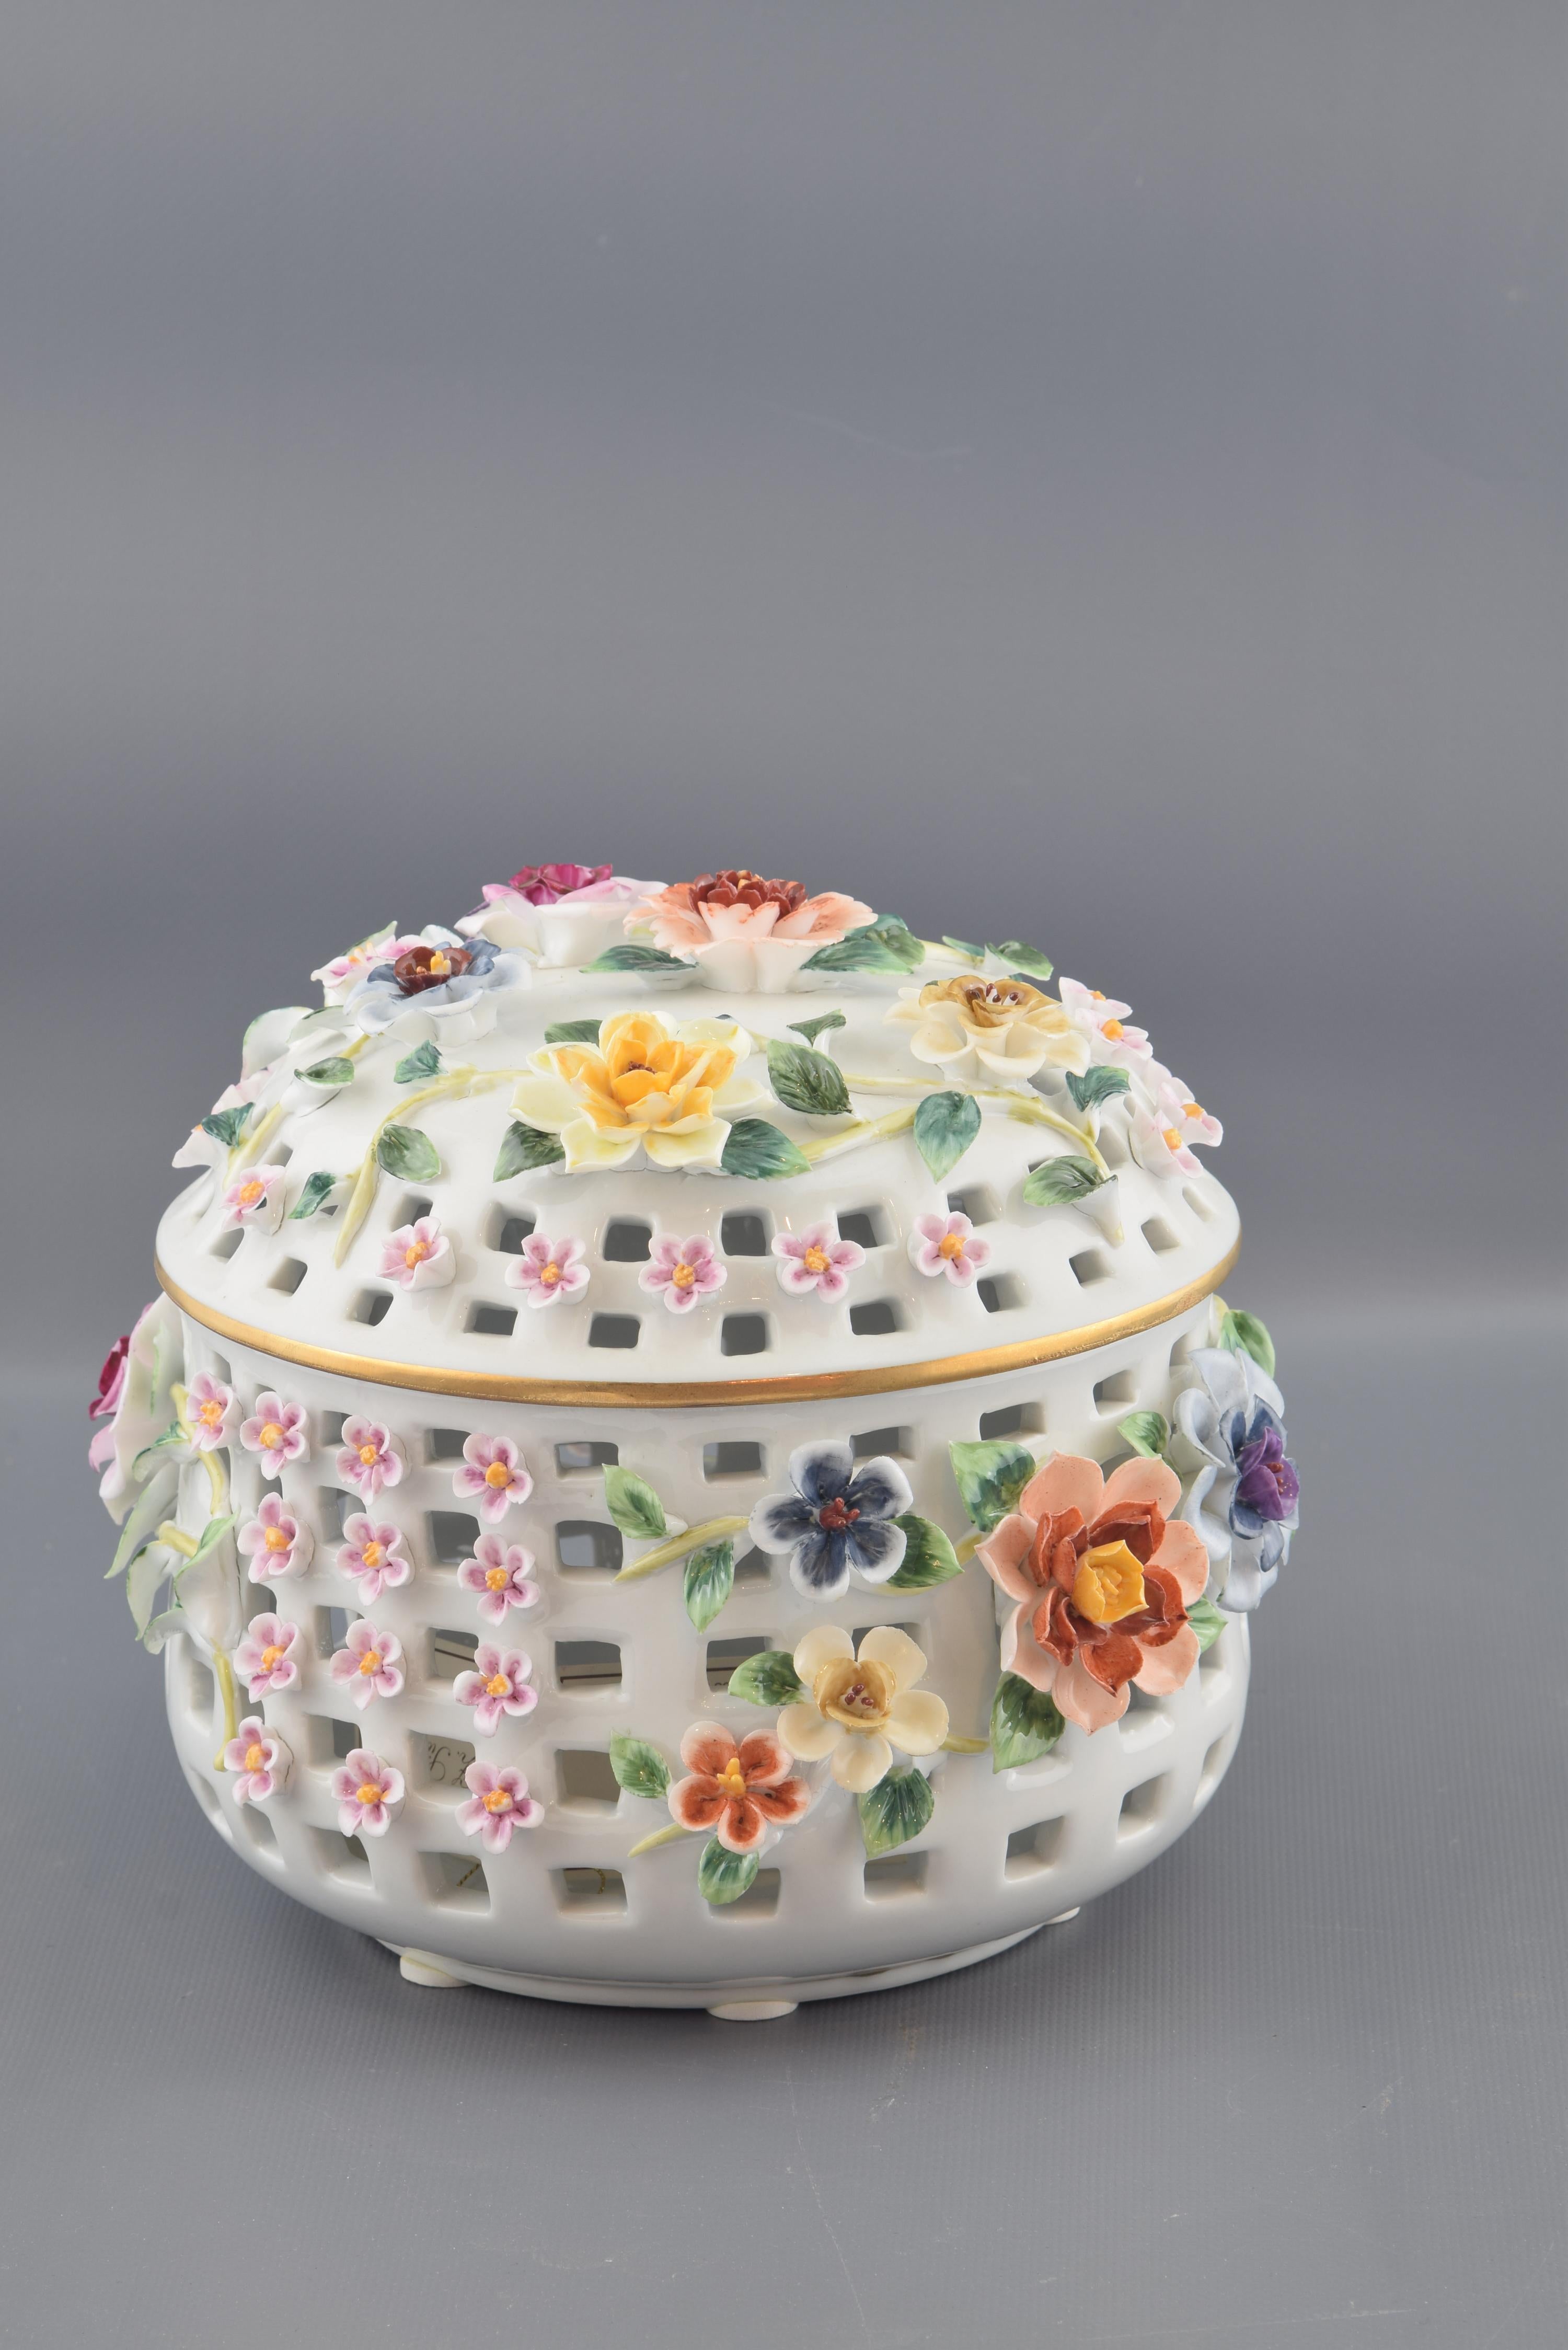 European Porcelain Sweet Box with Flowers, after Models from Sèvres 'France'